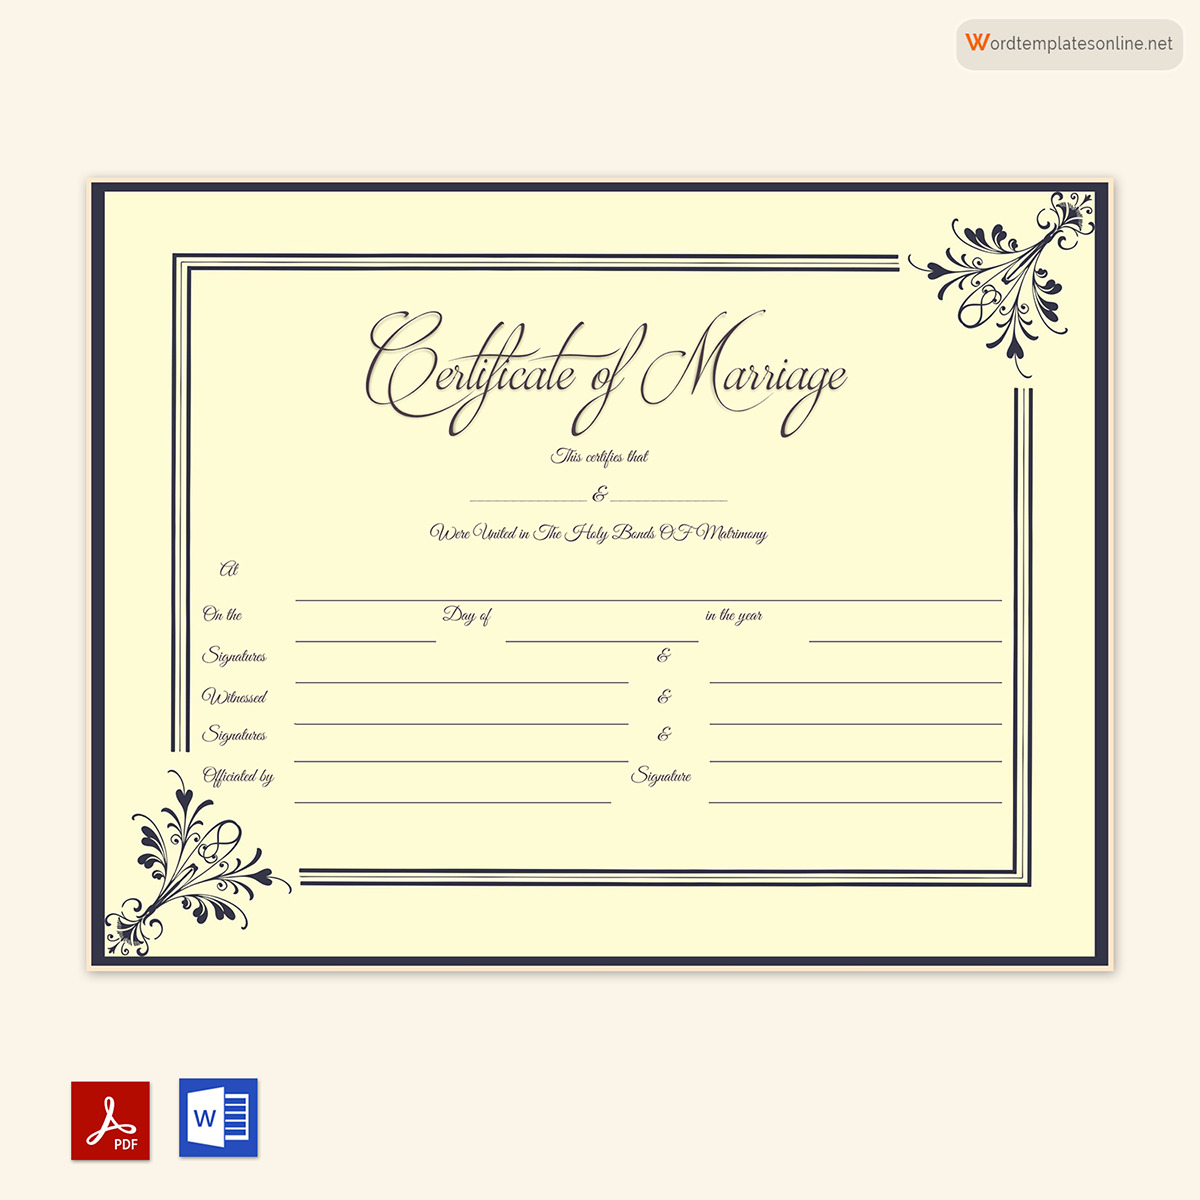 Marriage Certificate Template online